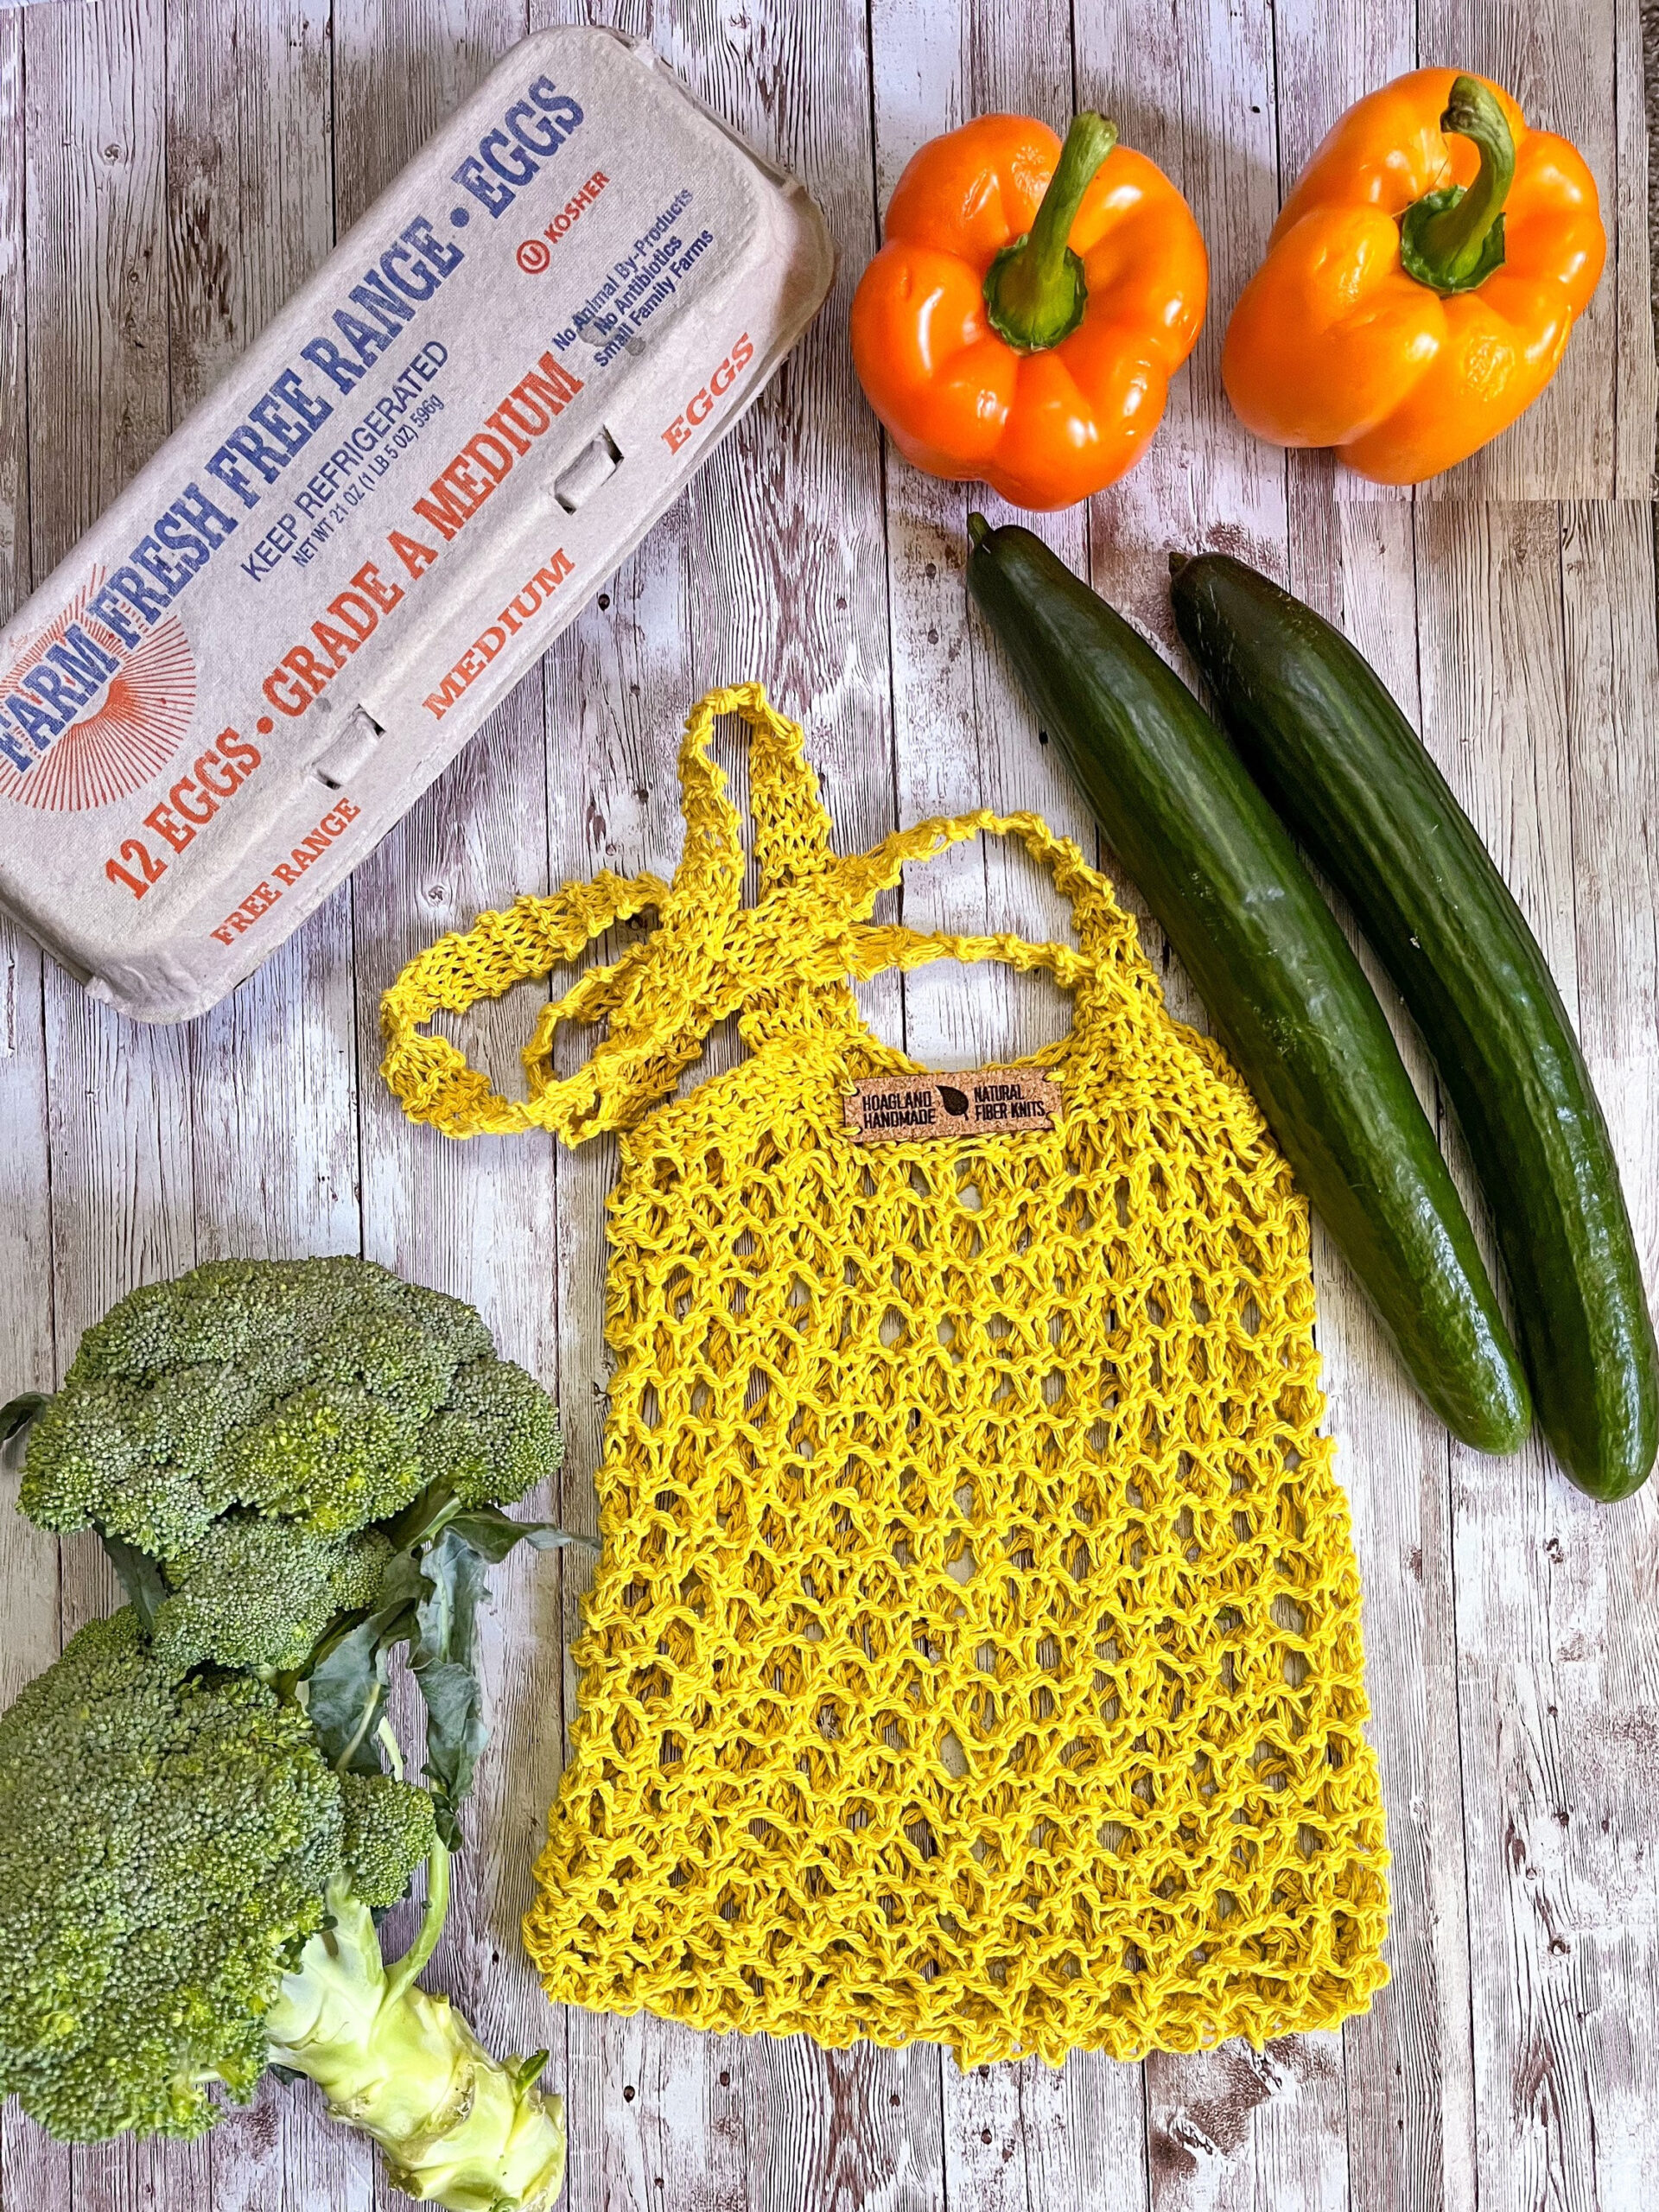 A yellow recycled cotton mesh tote bag is surrounded by a carton of farm eggs, orange bell peppers, cucumbers, and broccoli